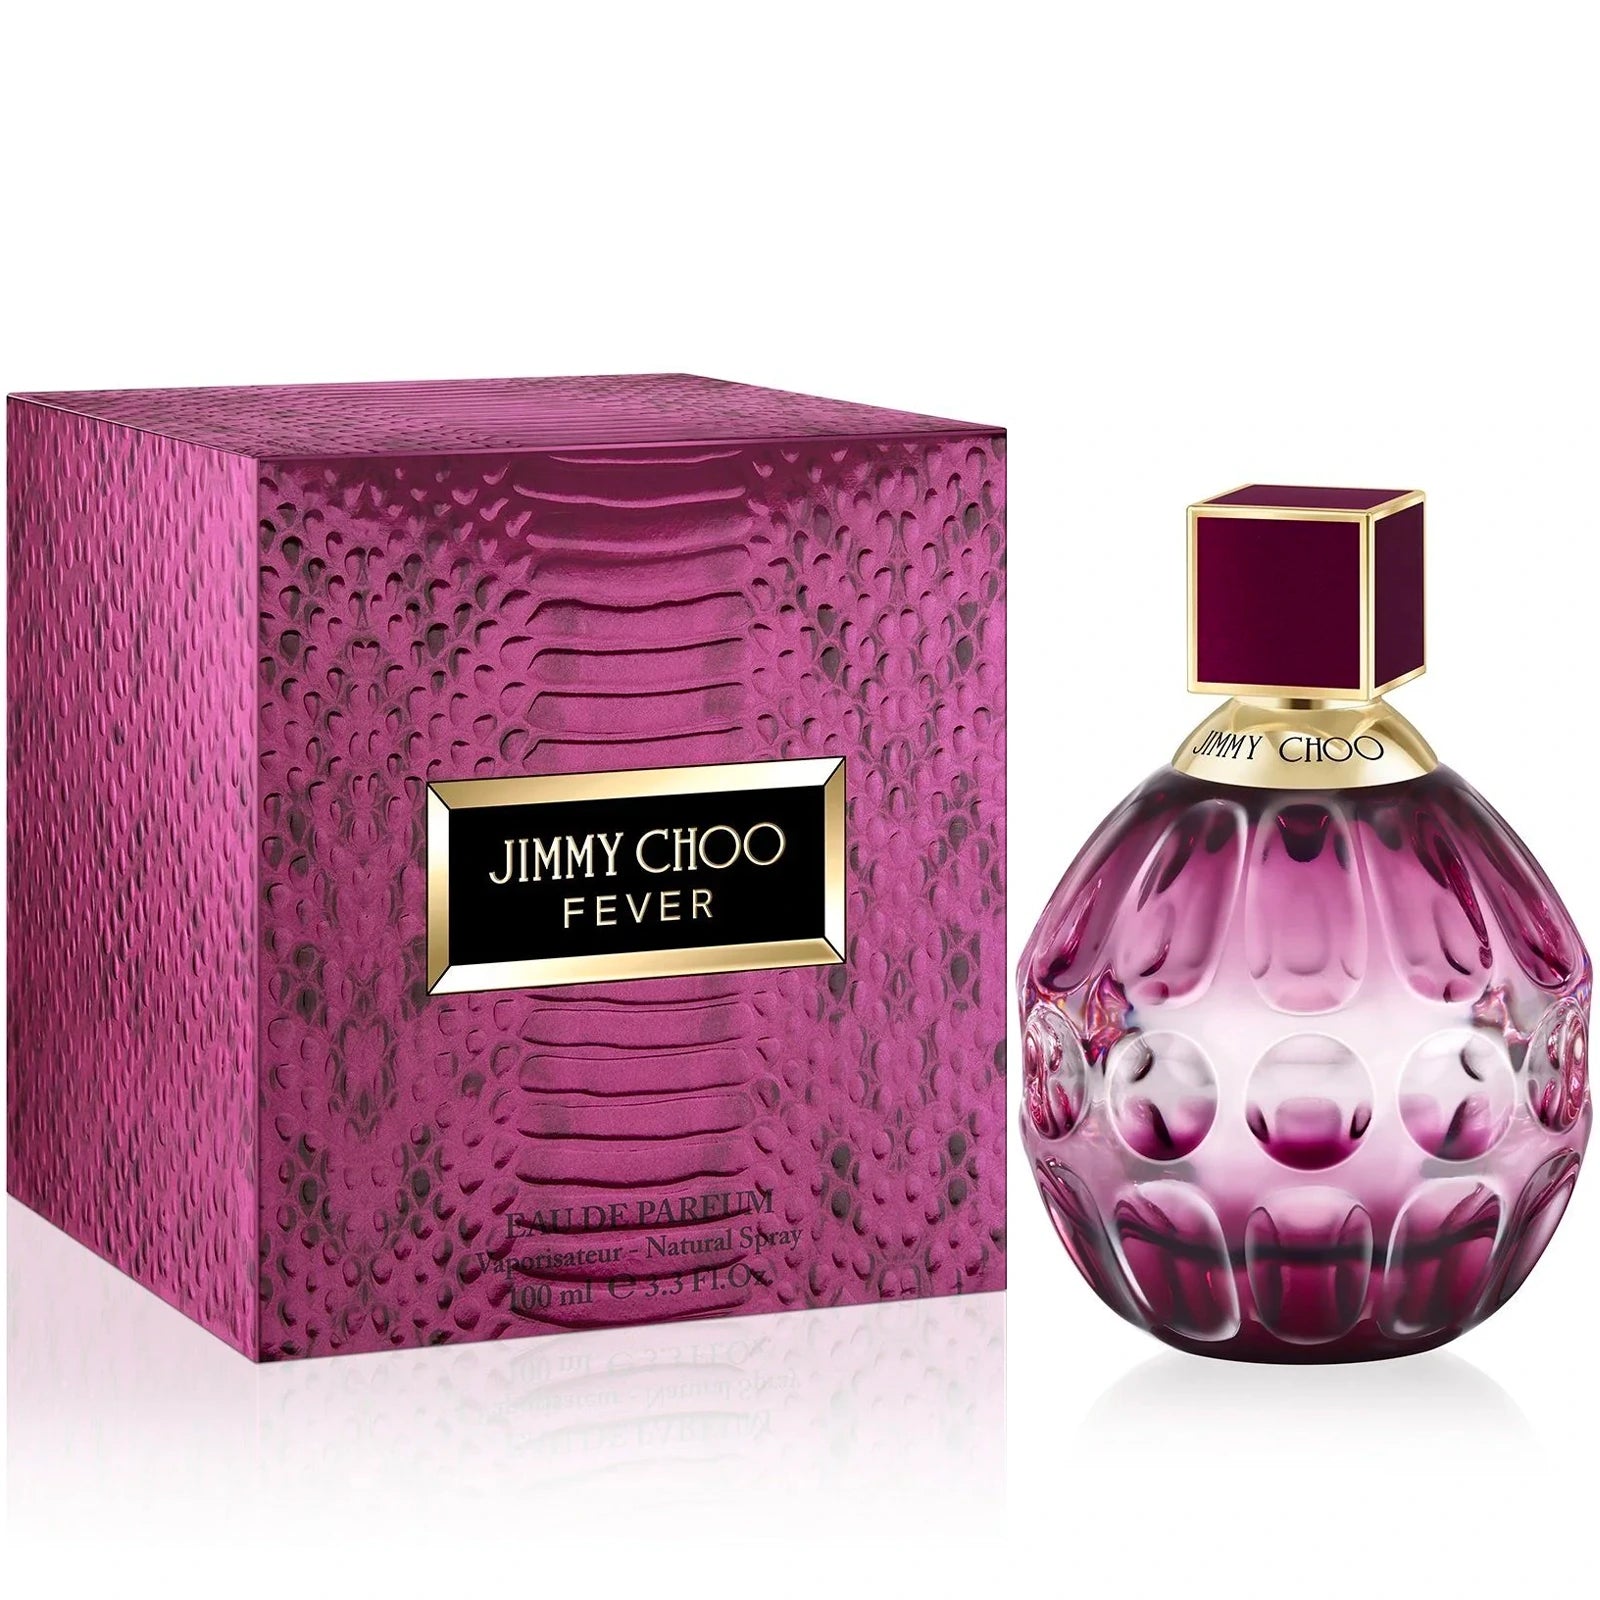 Jimmy Choo Fever, an addictive fragrance celebrating a new facet of the Jimmy Choo woman, an innate extrovert with a playful energy and sense of fun. Effortlessly glamourous and instinctively seductive, no one’s going to get in her way. A hypnotic play on contrasts between floral and gourmand, Jimmy Choo Fever is an addictive new scent that carries its wearer into the night, leaving an addictive sensual trail behind her. The bottle is adorned with an intense deep plum lacquer and the fragrance radiating from its centre as the light dances on its multi-faceted form. The outer packaging is reinterpreted with a metallic plum effect that mirrors the light, embossed to give a true to life texture. Top notes: Black Plum Nectar, Lychee, Grapefruit Heart notes: Heliotrope, Vanilla Orchid, Jasmine Base notes: Roasted Tonka Bean, Benzoin, Sandalwood